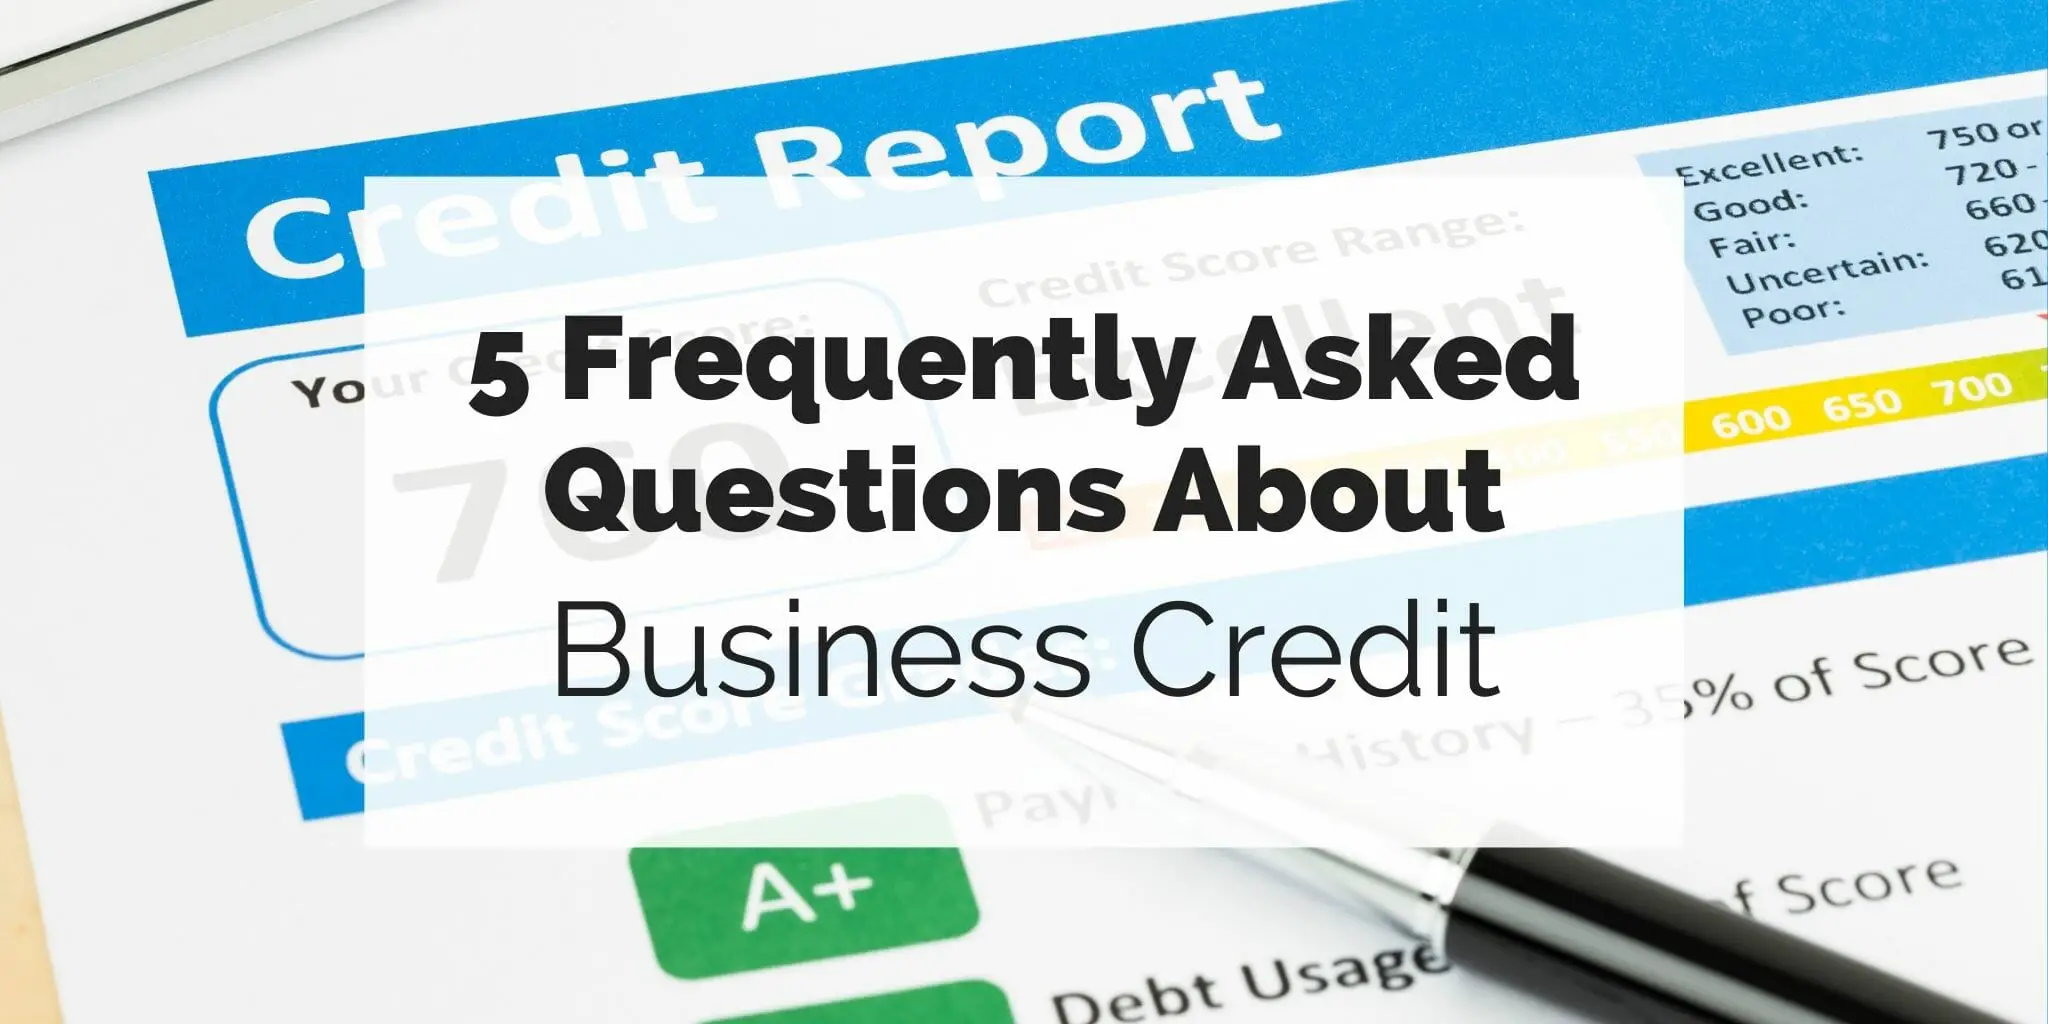 5 Frequently Asked Questions About Business Credit